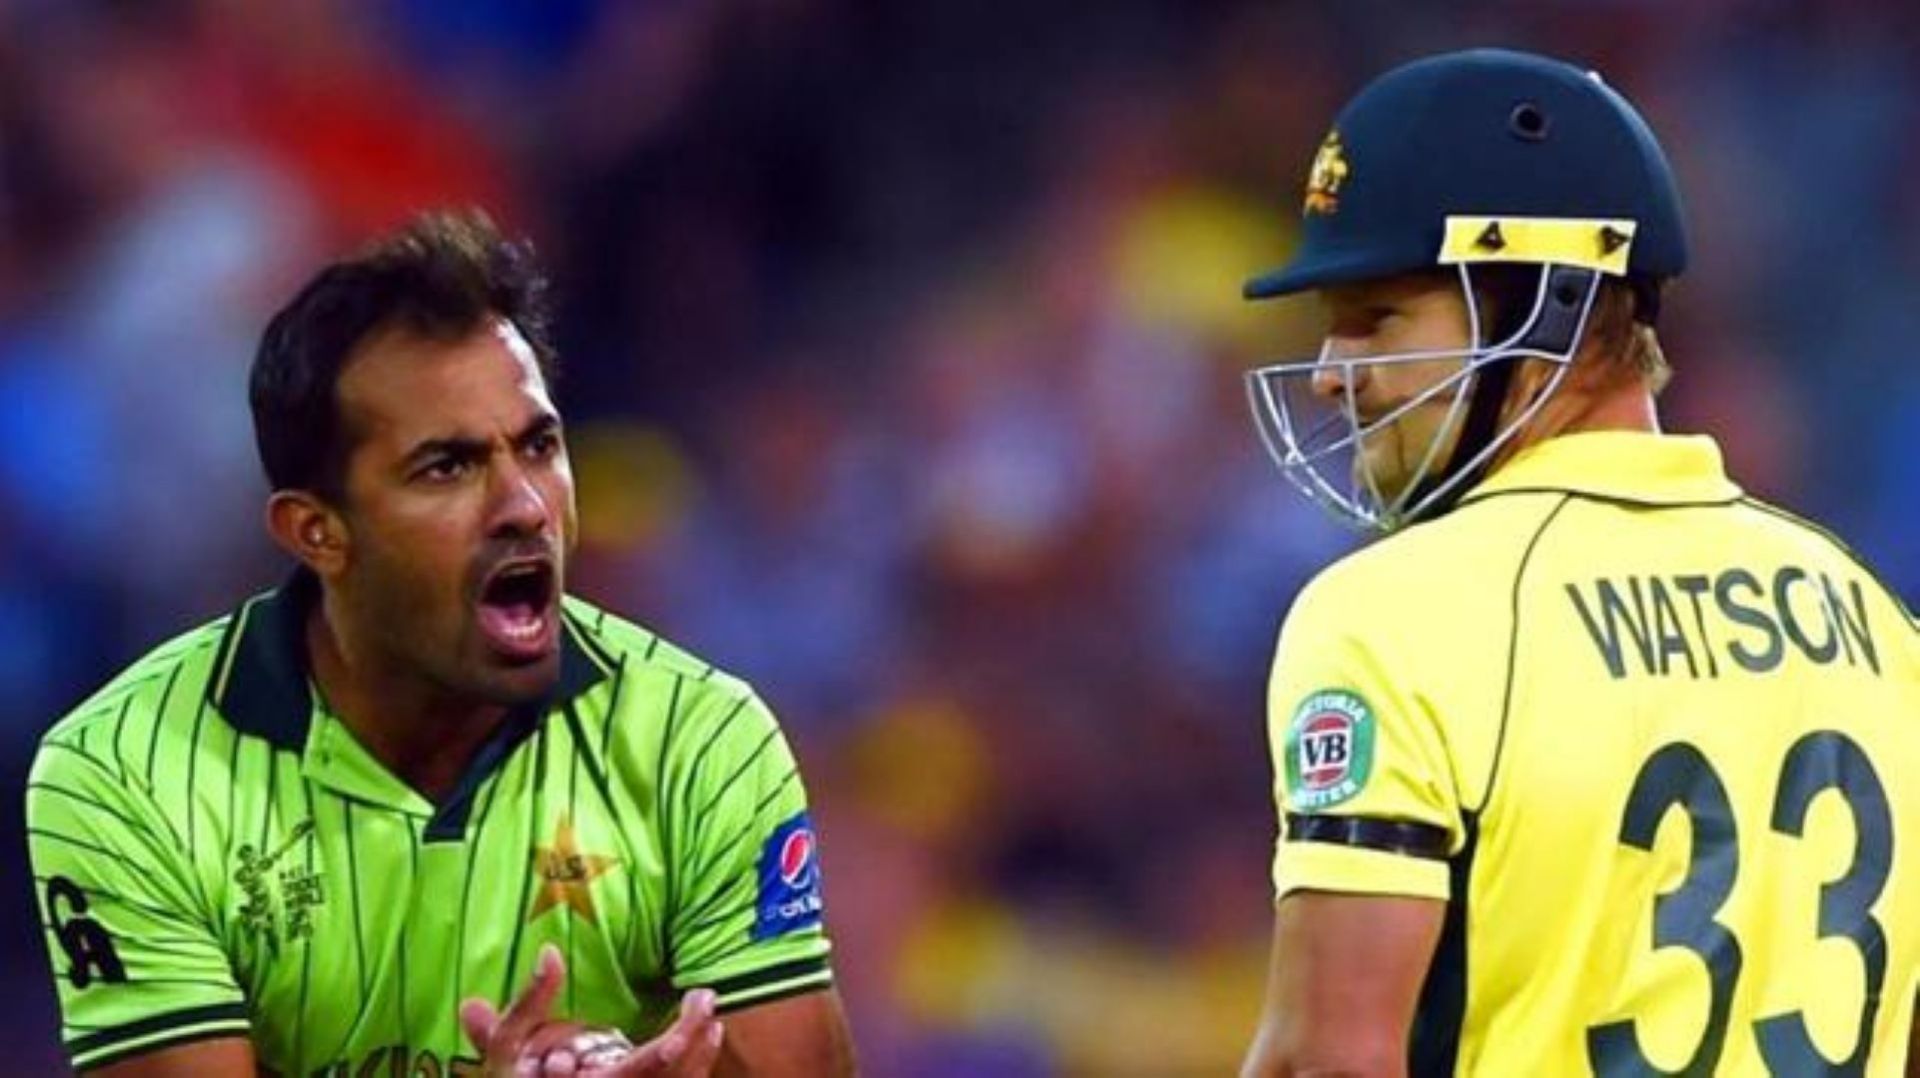 Riaz&#039;s spell to Shane Watson in the 2015 World Cup ranks amongst the most fearsome bit of fast bowling.